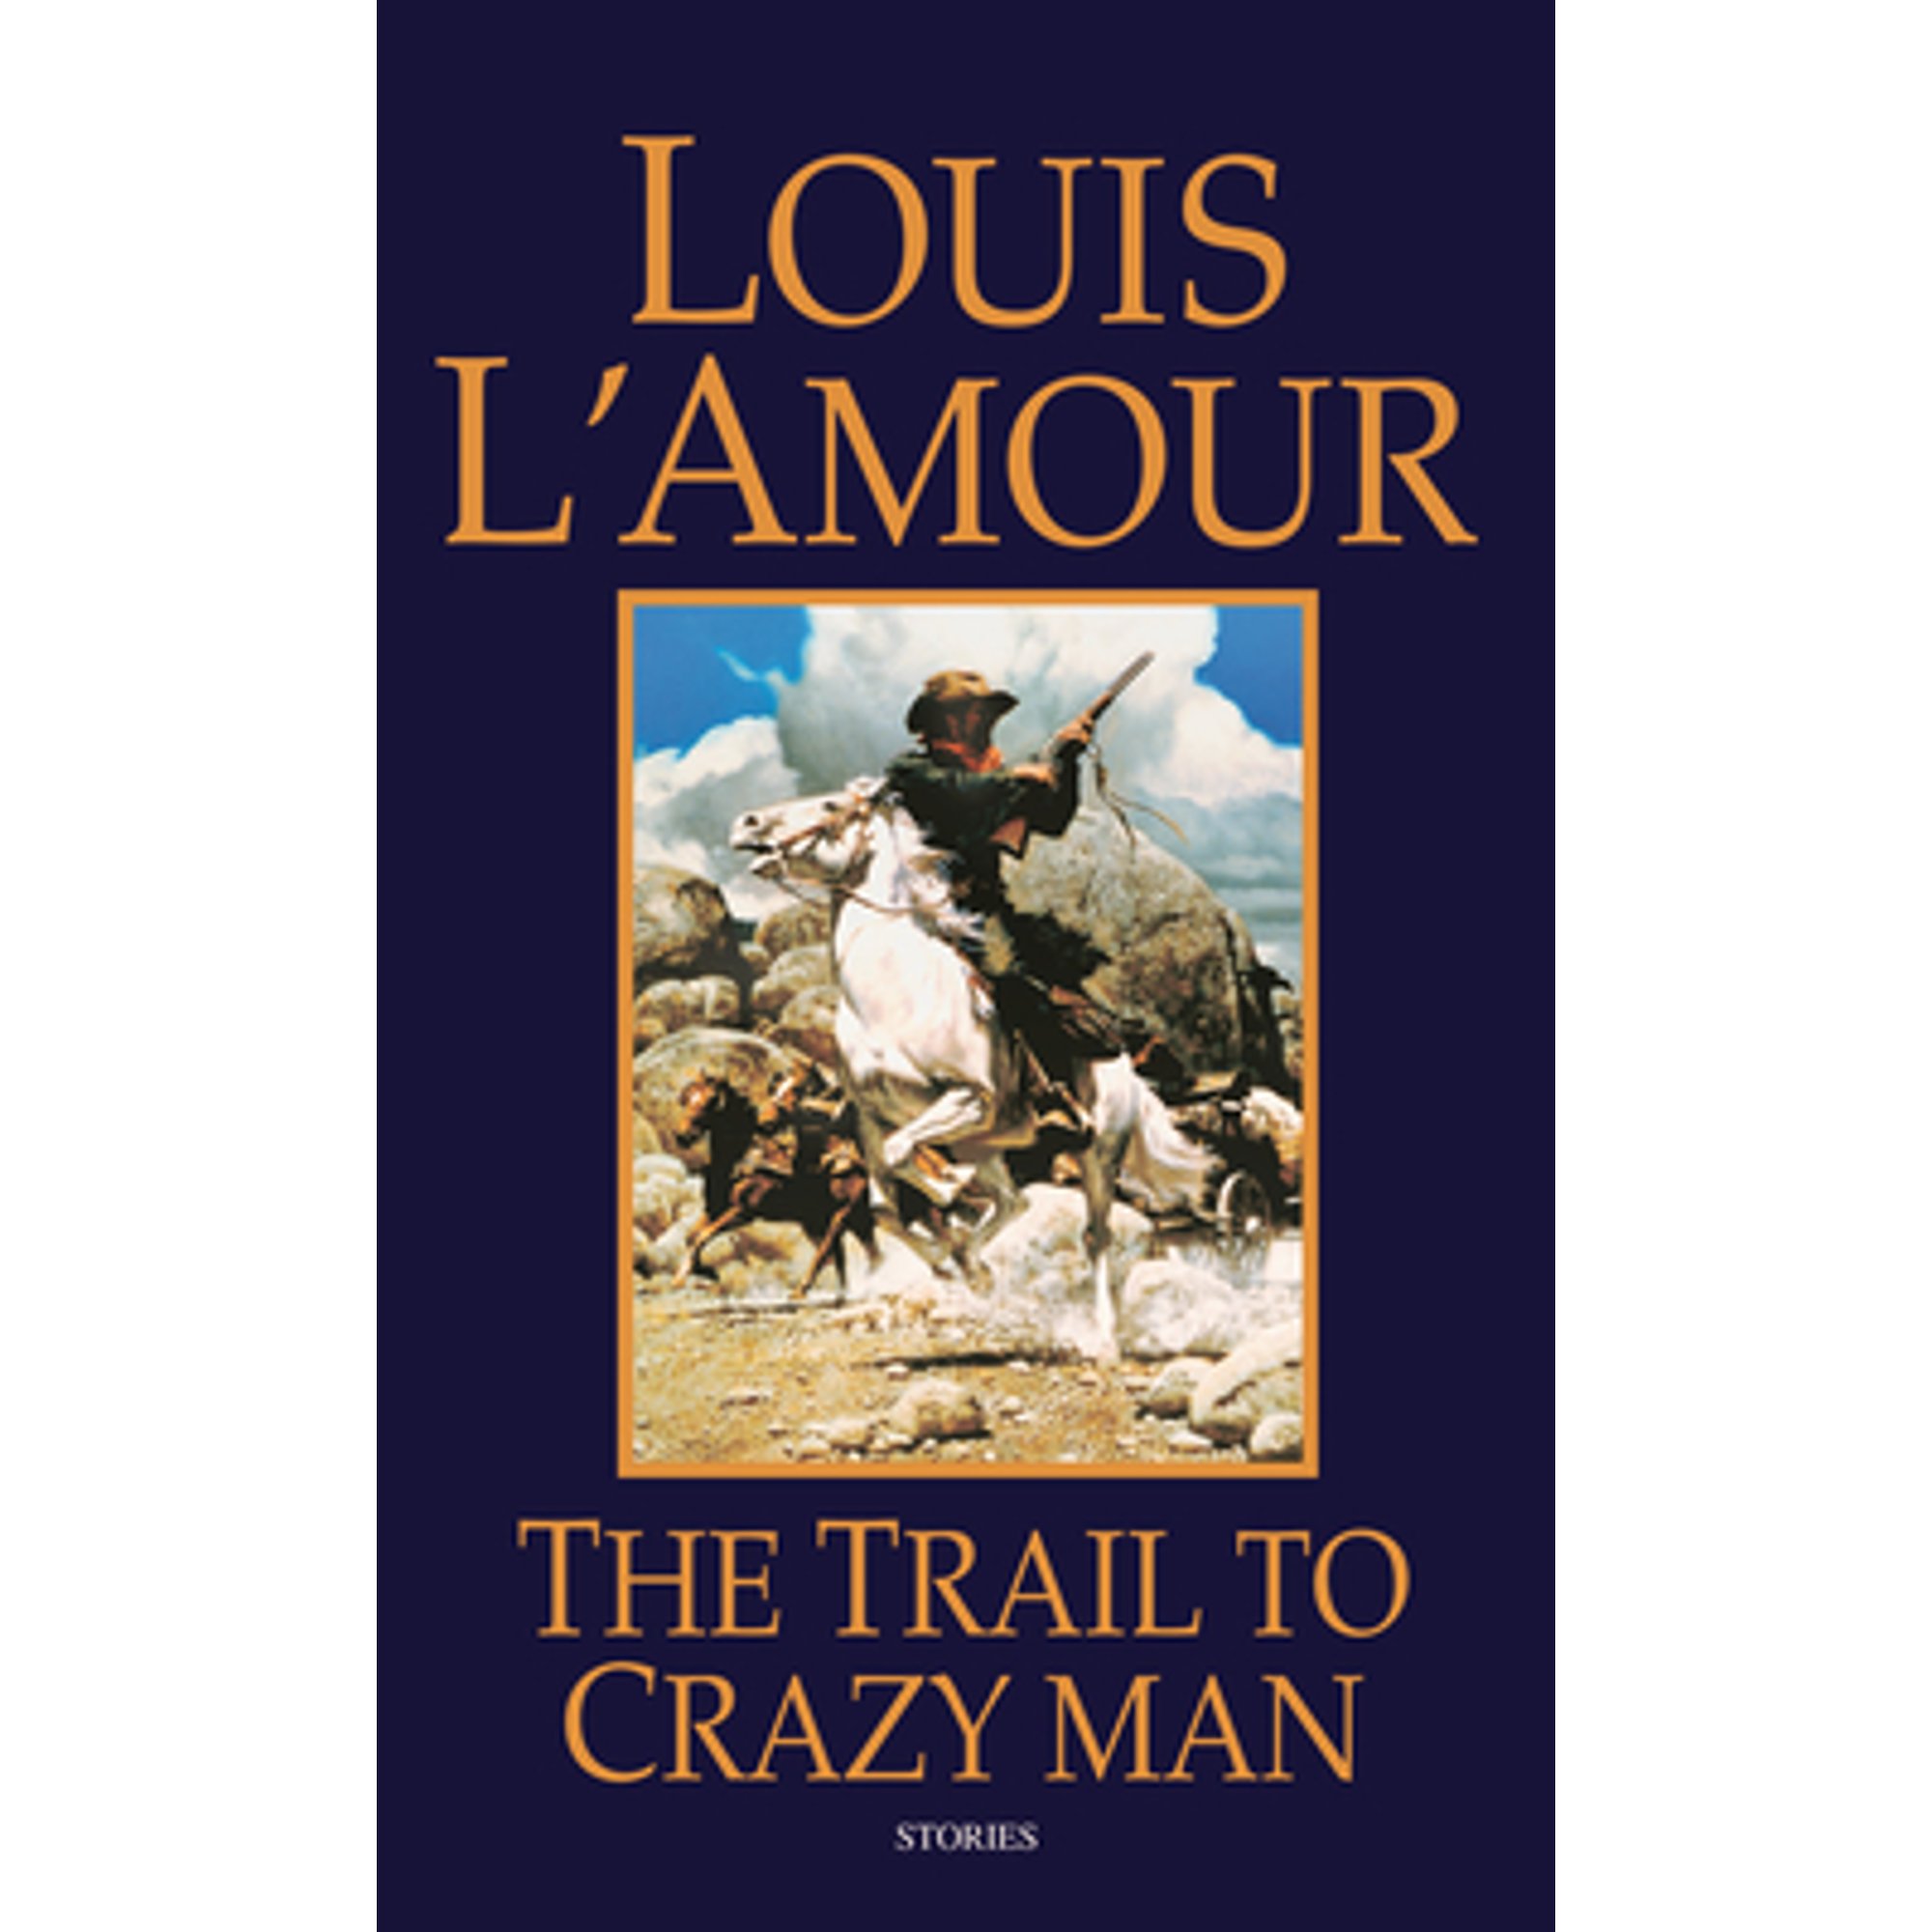 The Trail to Crazy Man: Stories (Paperback) by Louis L'Amour - image 1 of 1